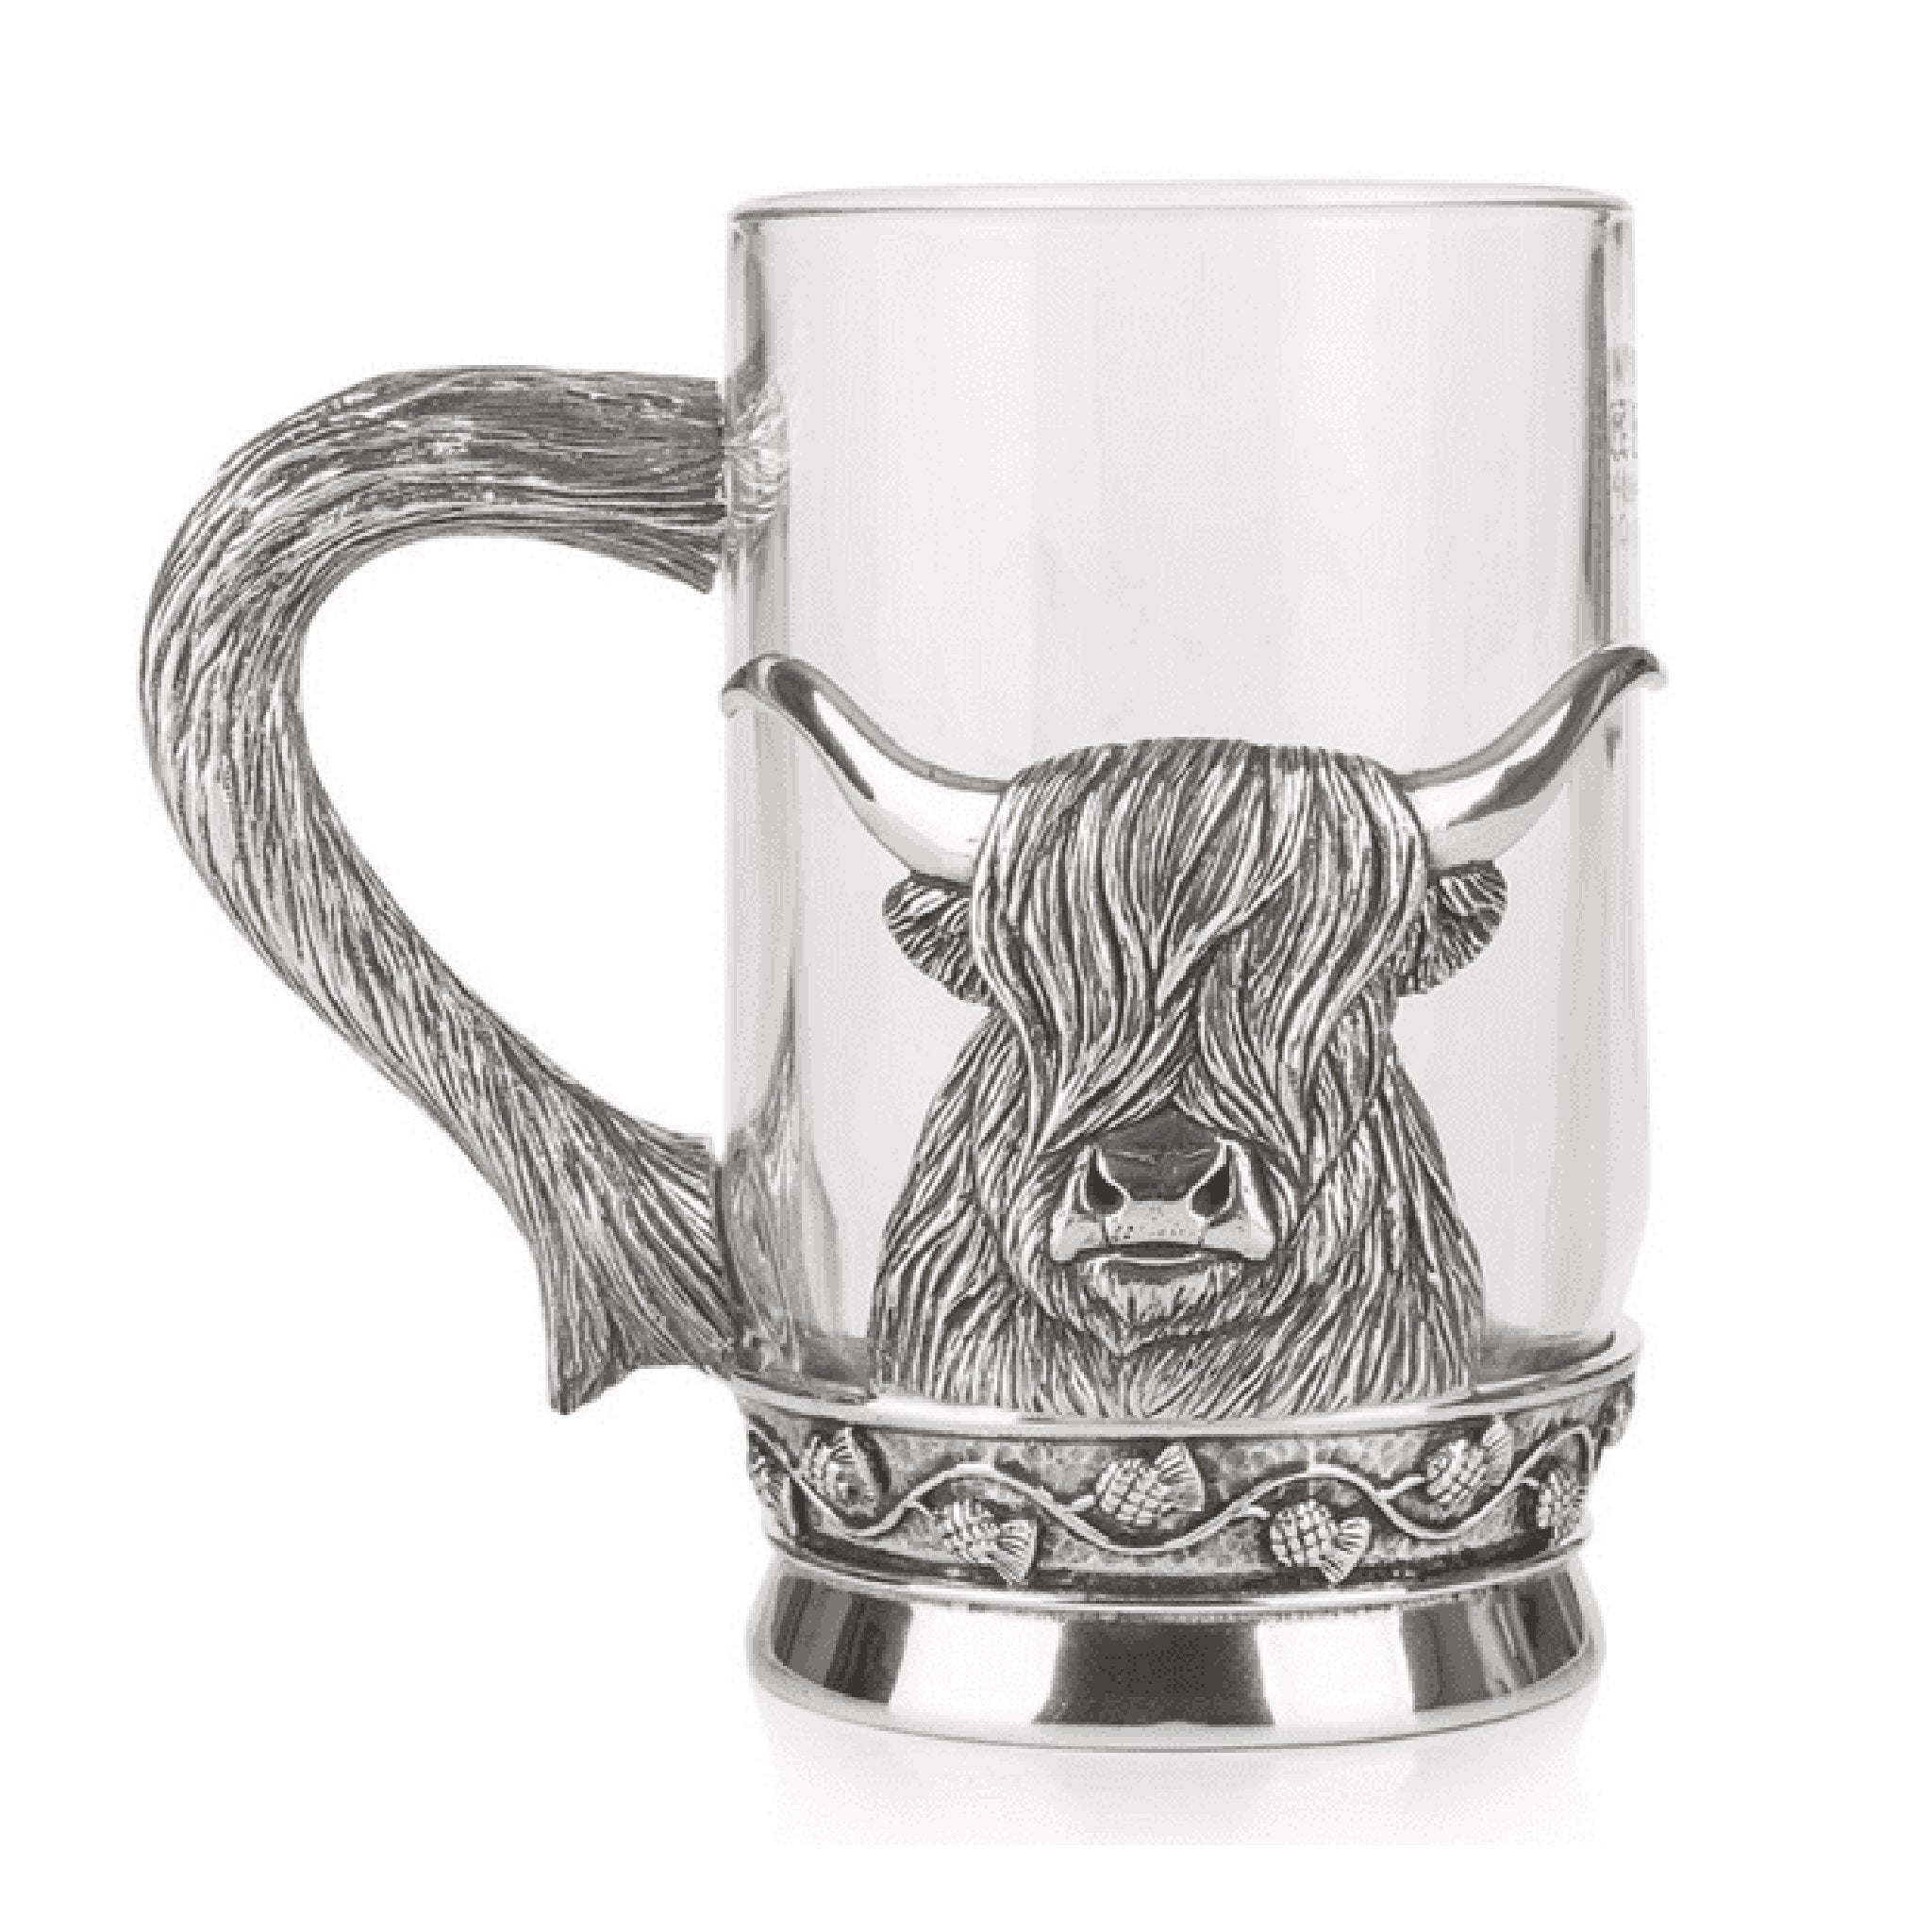 A glass tankard with a pewter Highland cow and horn shaped handle